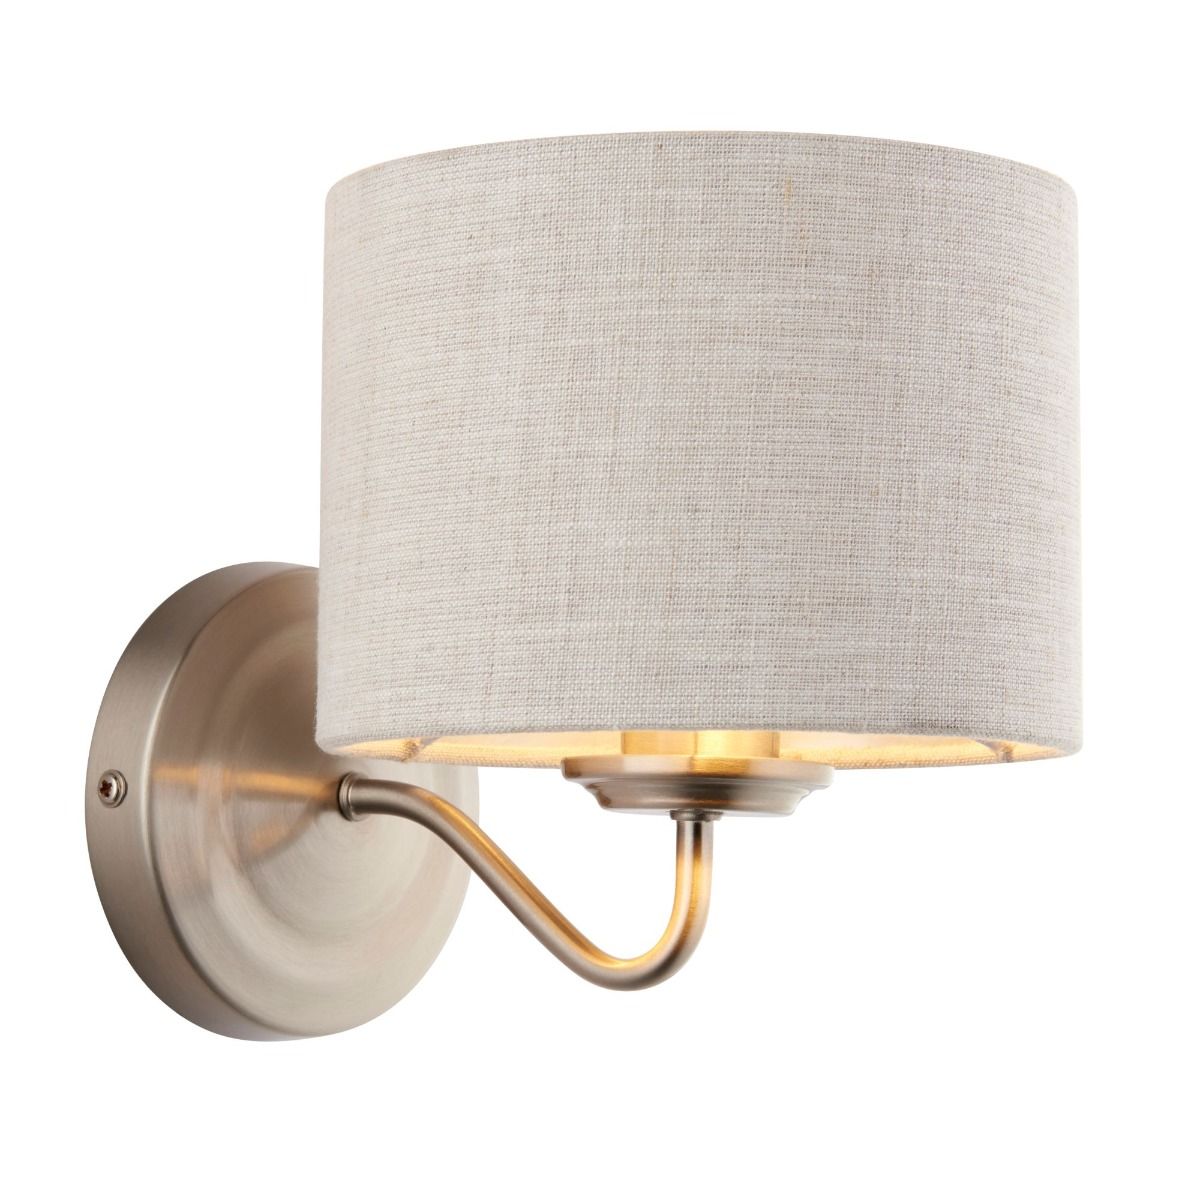 Cordale 1 Light Brushed Nickel and Linen Wall Light